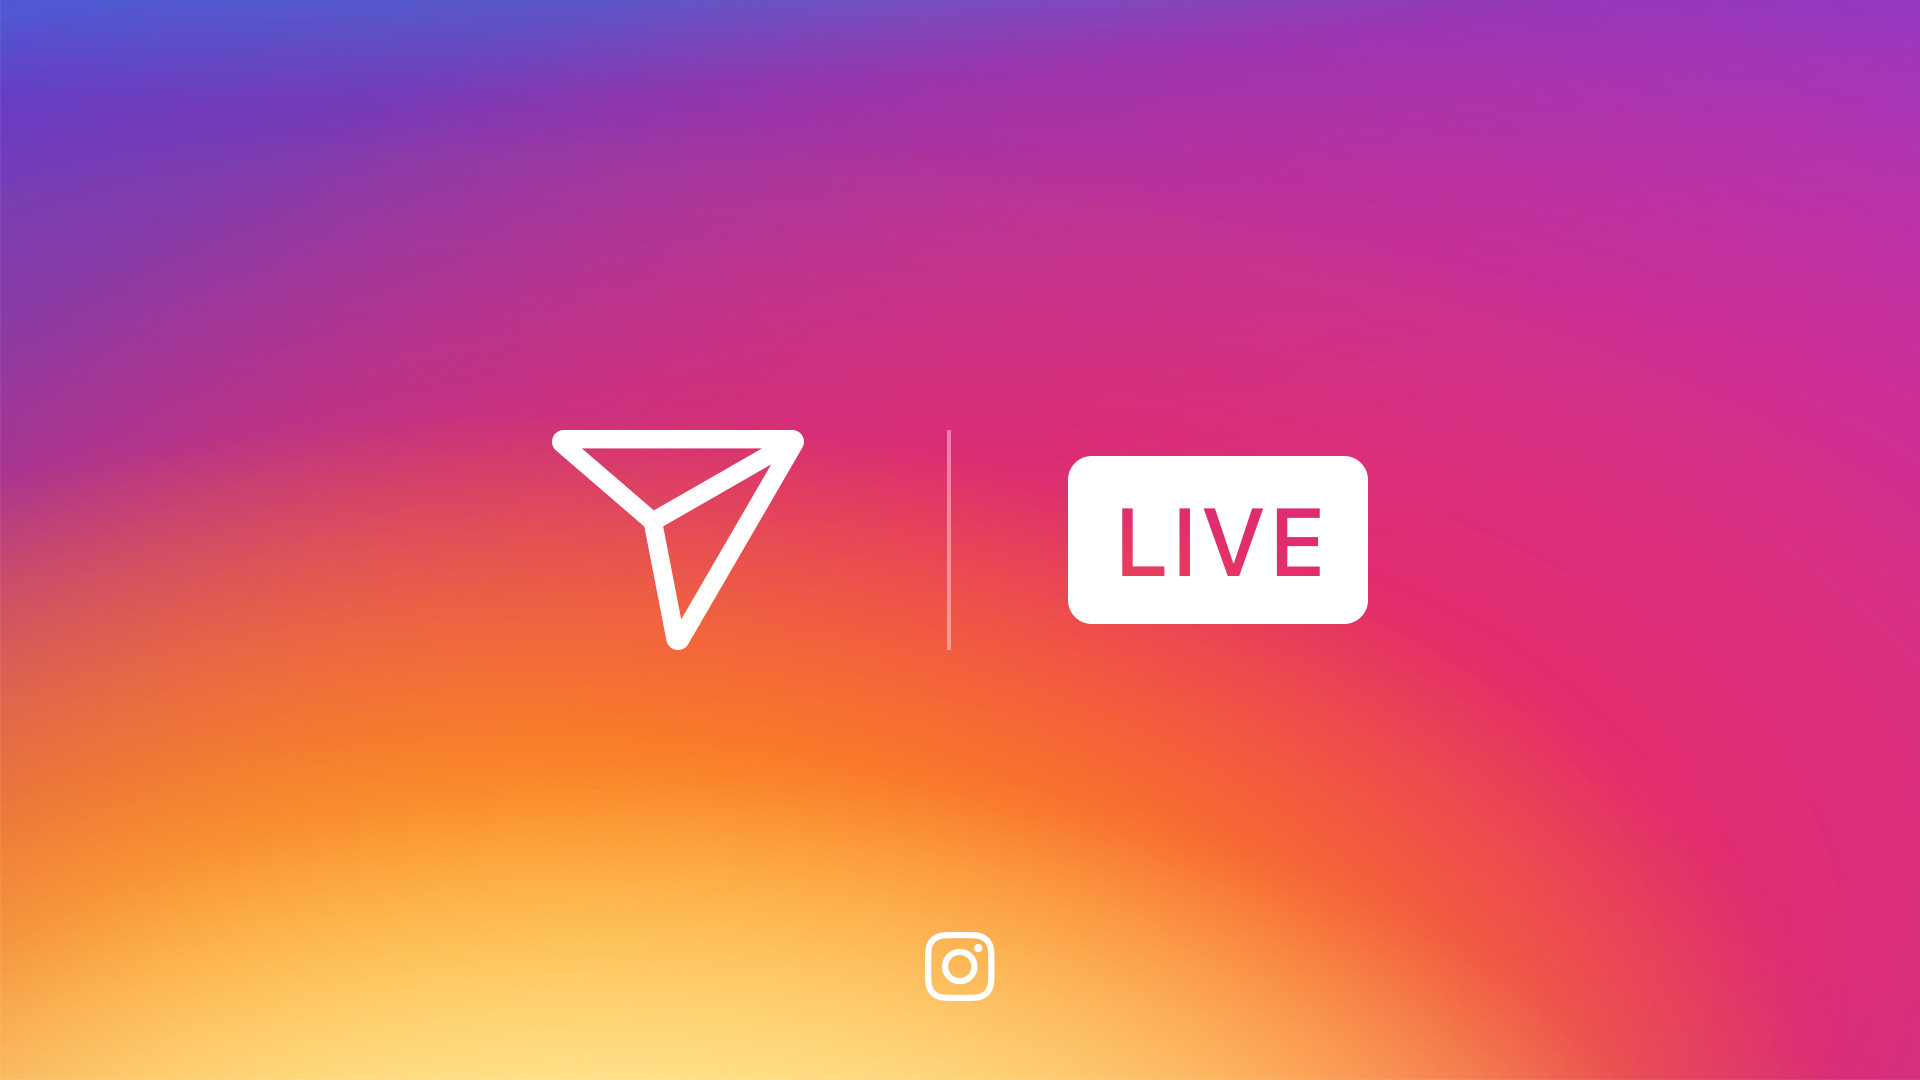 1920x1080 Today we're announcing two updates: live video on Instagram Stories and  disappearing photos and videos for groups and friends in Instagram Direct.